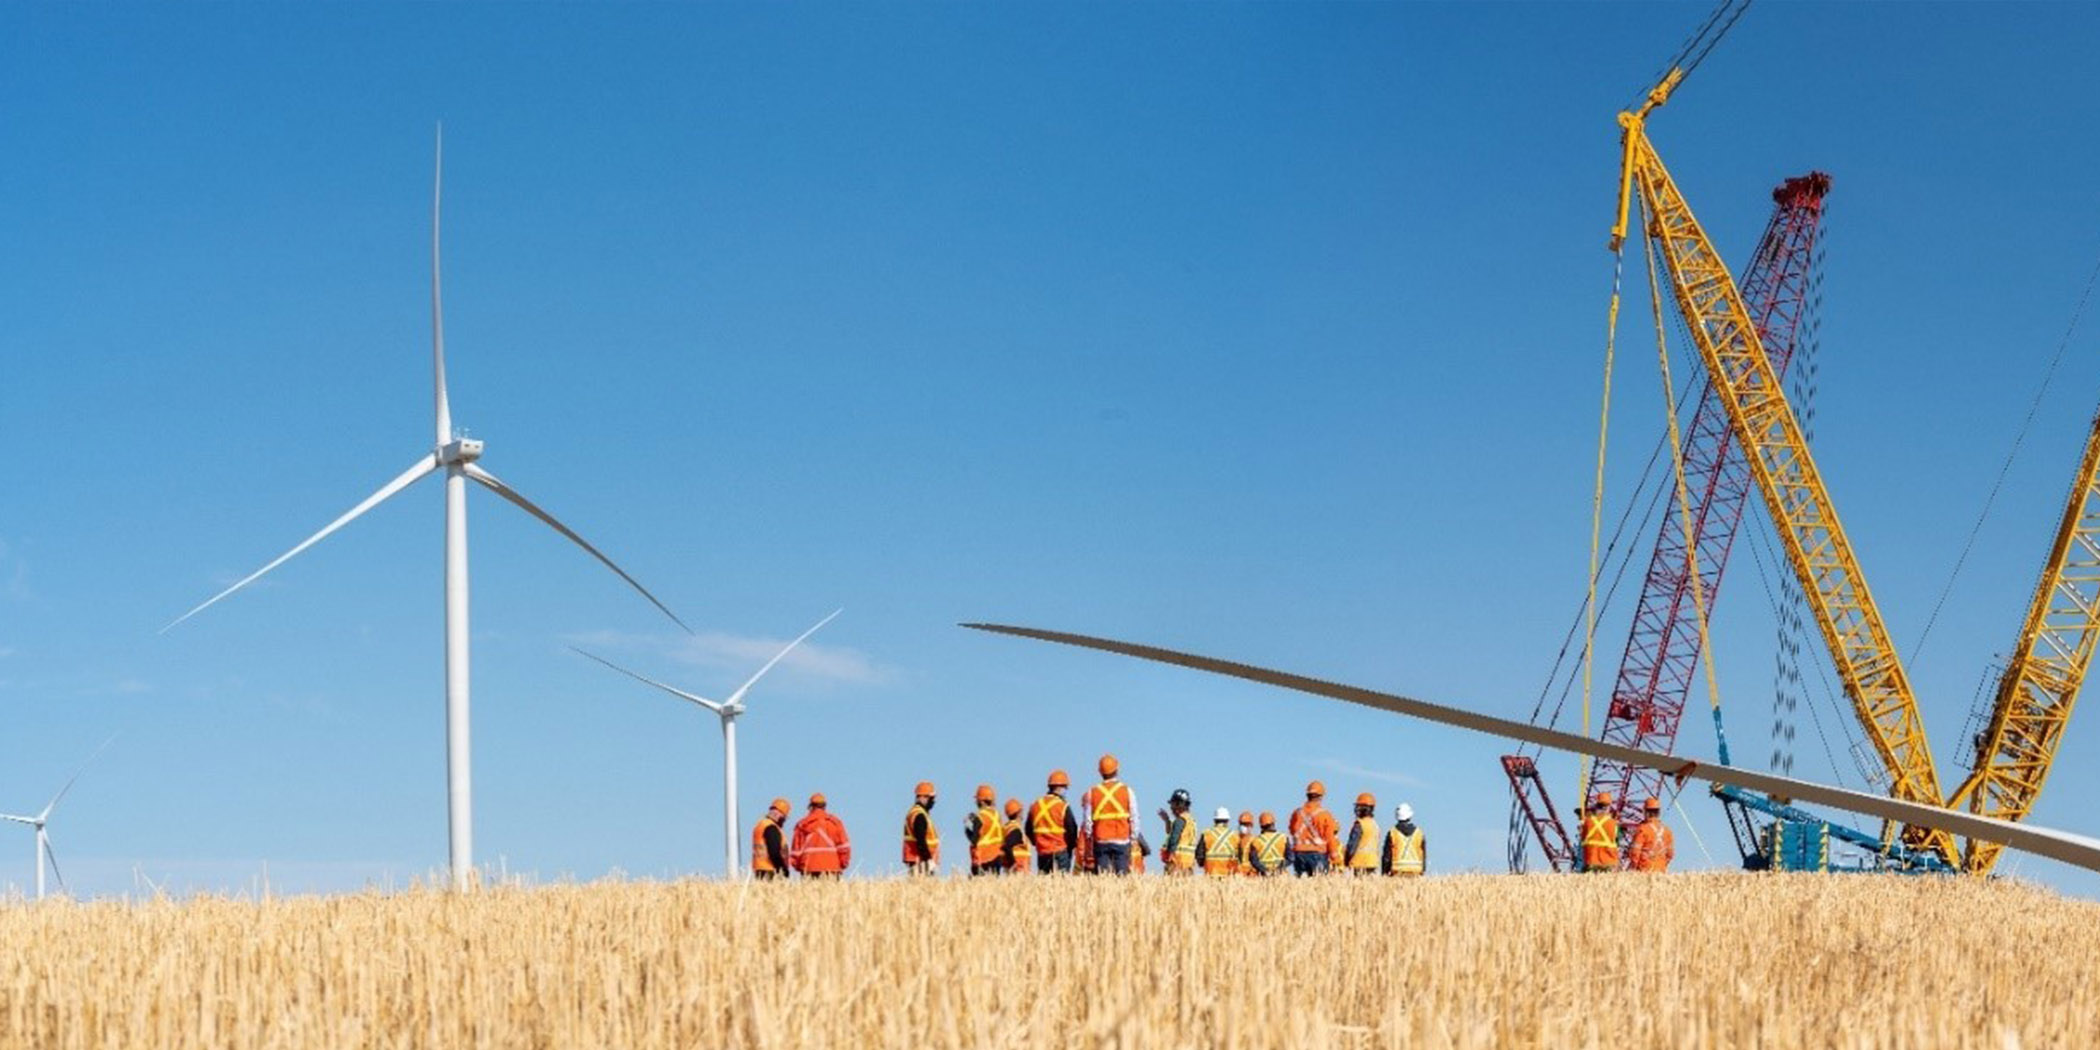 2 Wind turbines in the background with a group of workers dressed in orange around equipment